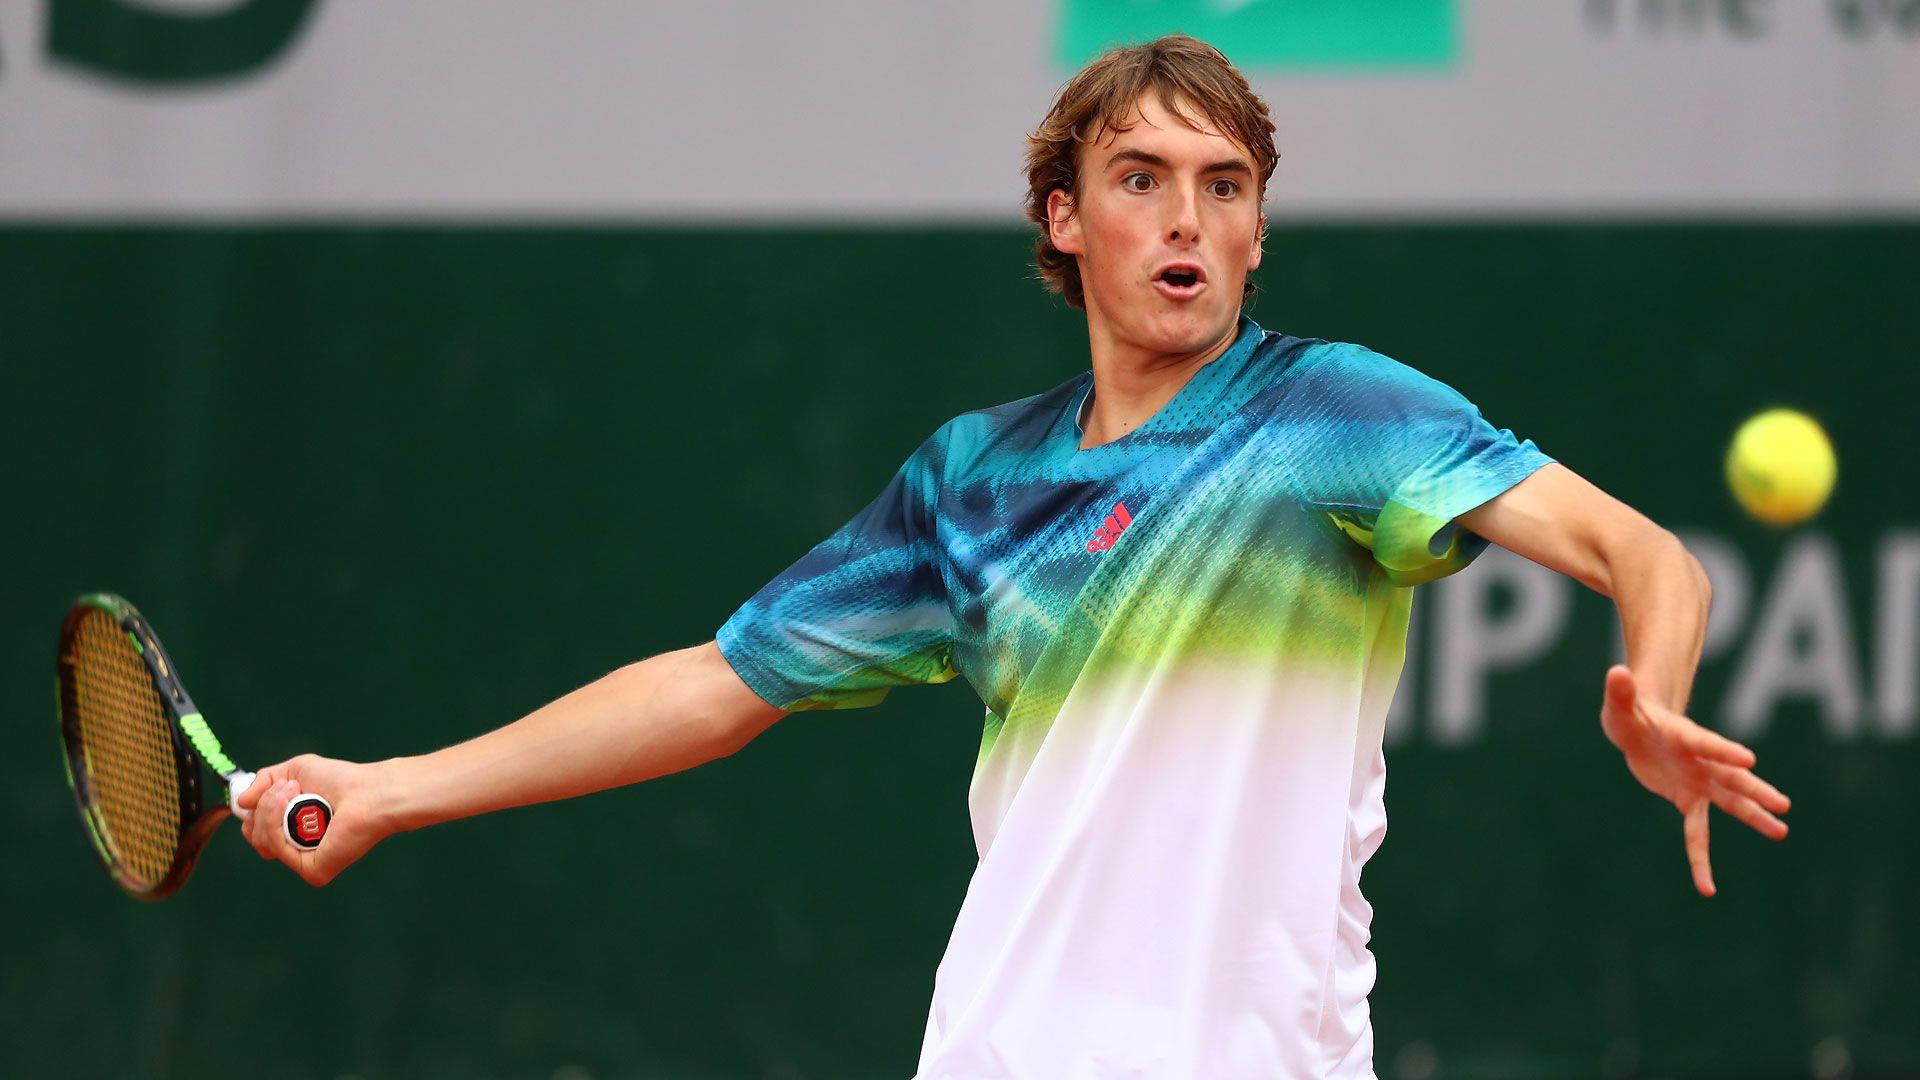 Young Stefanos Tsitsipas With Short Hair